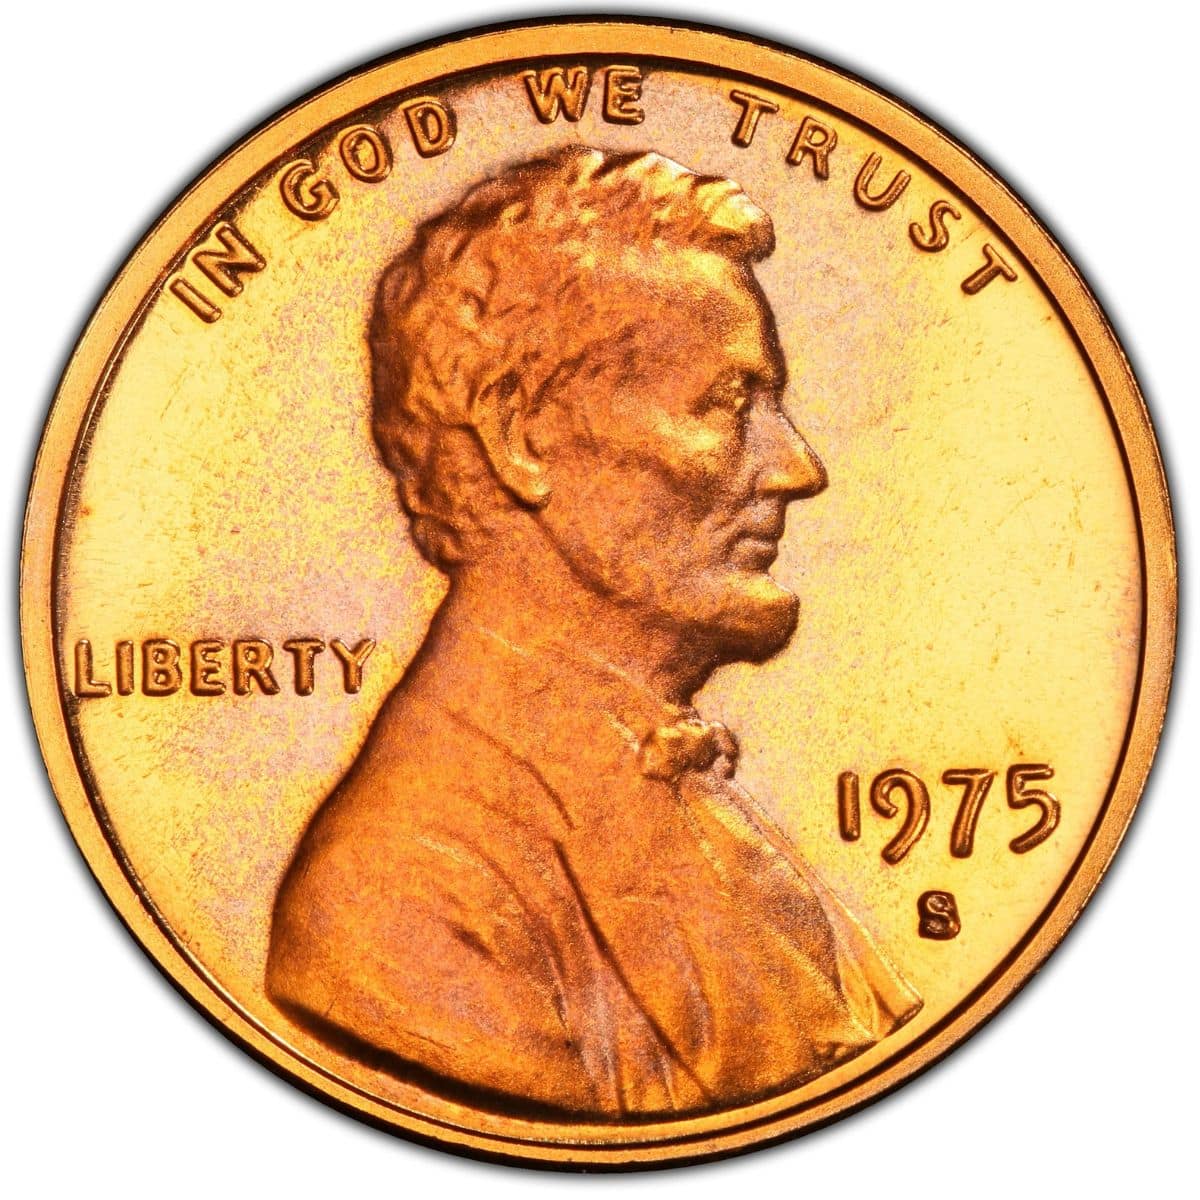 History of the 1975 Penny